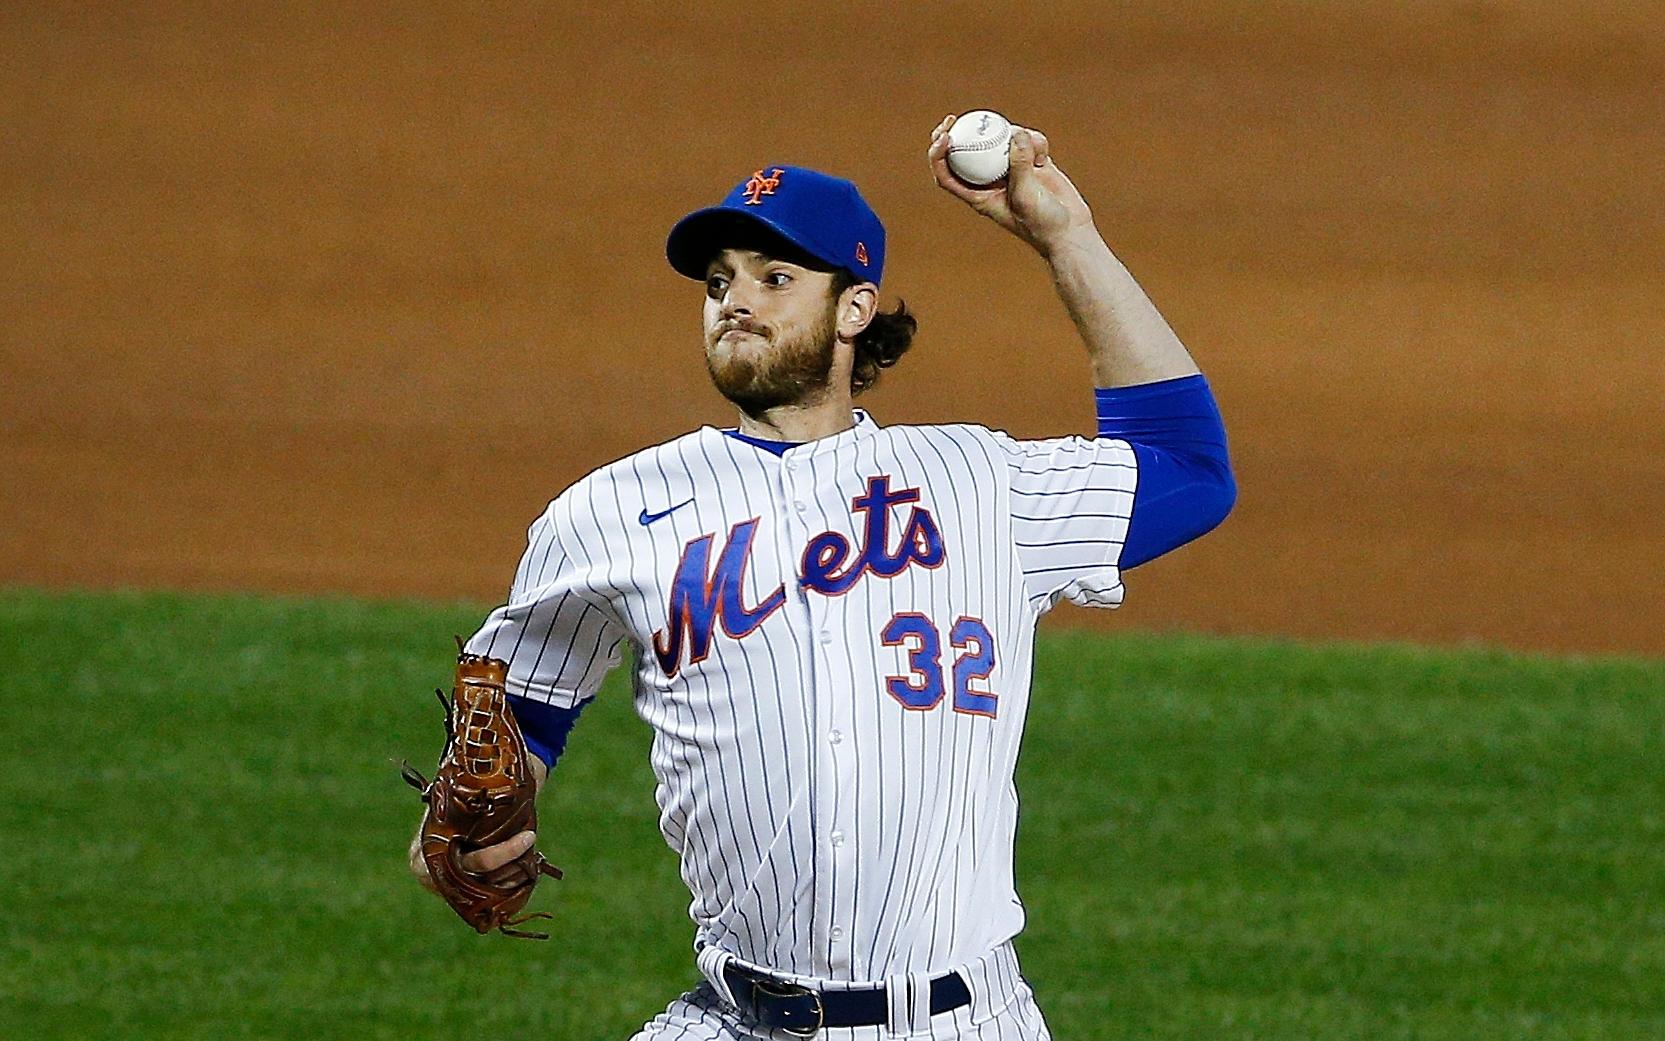 New York Mets starting pitcher Steven Matz (32) pitches against the Atlanta Braves during the first inning at Citi Field. / Andy Marlin - USA Today Sports